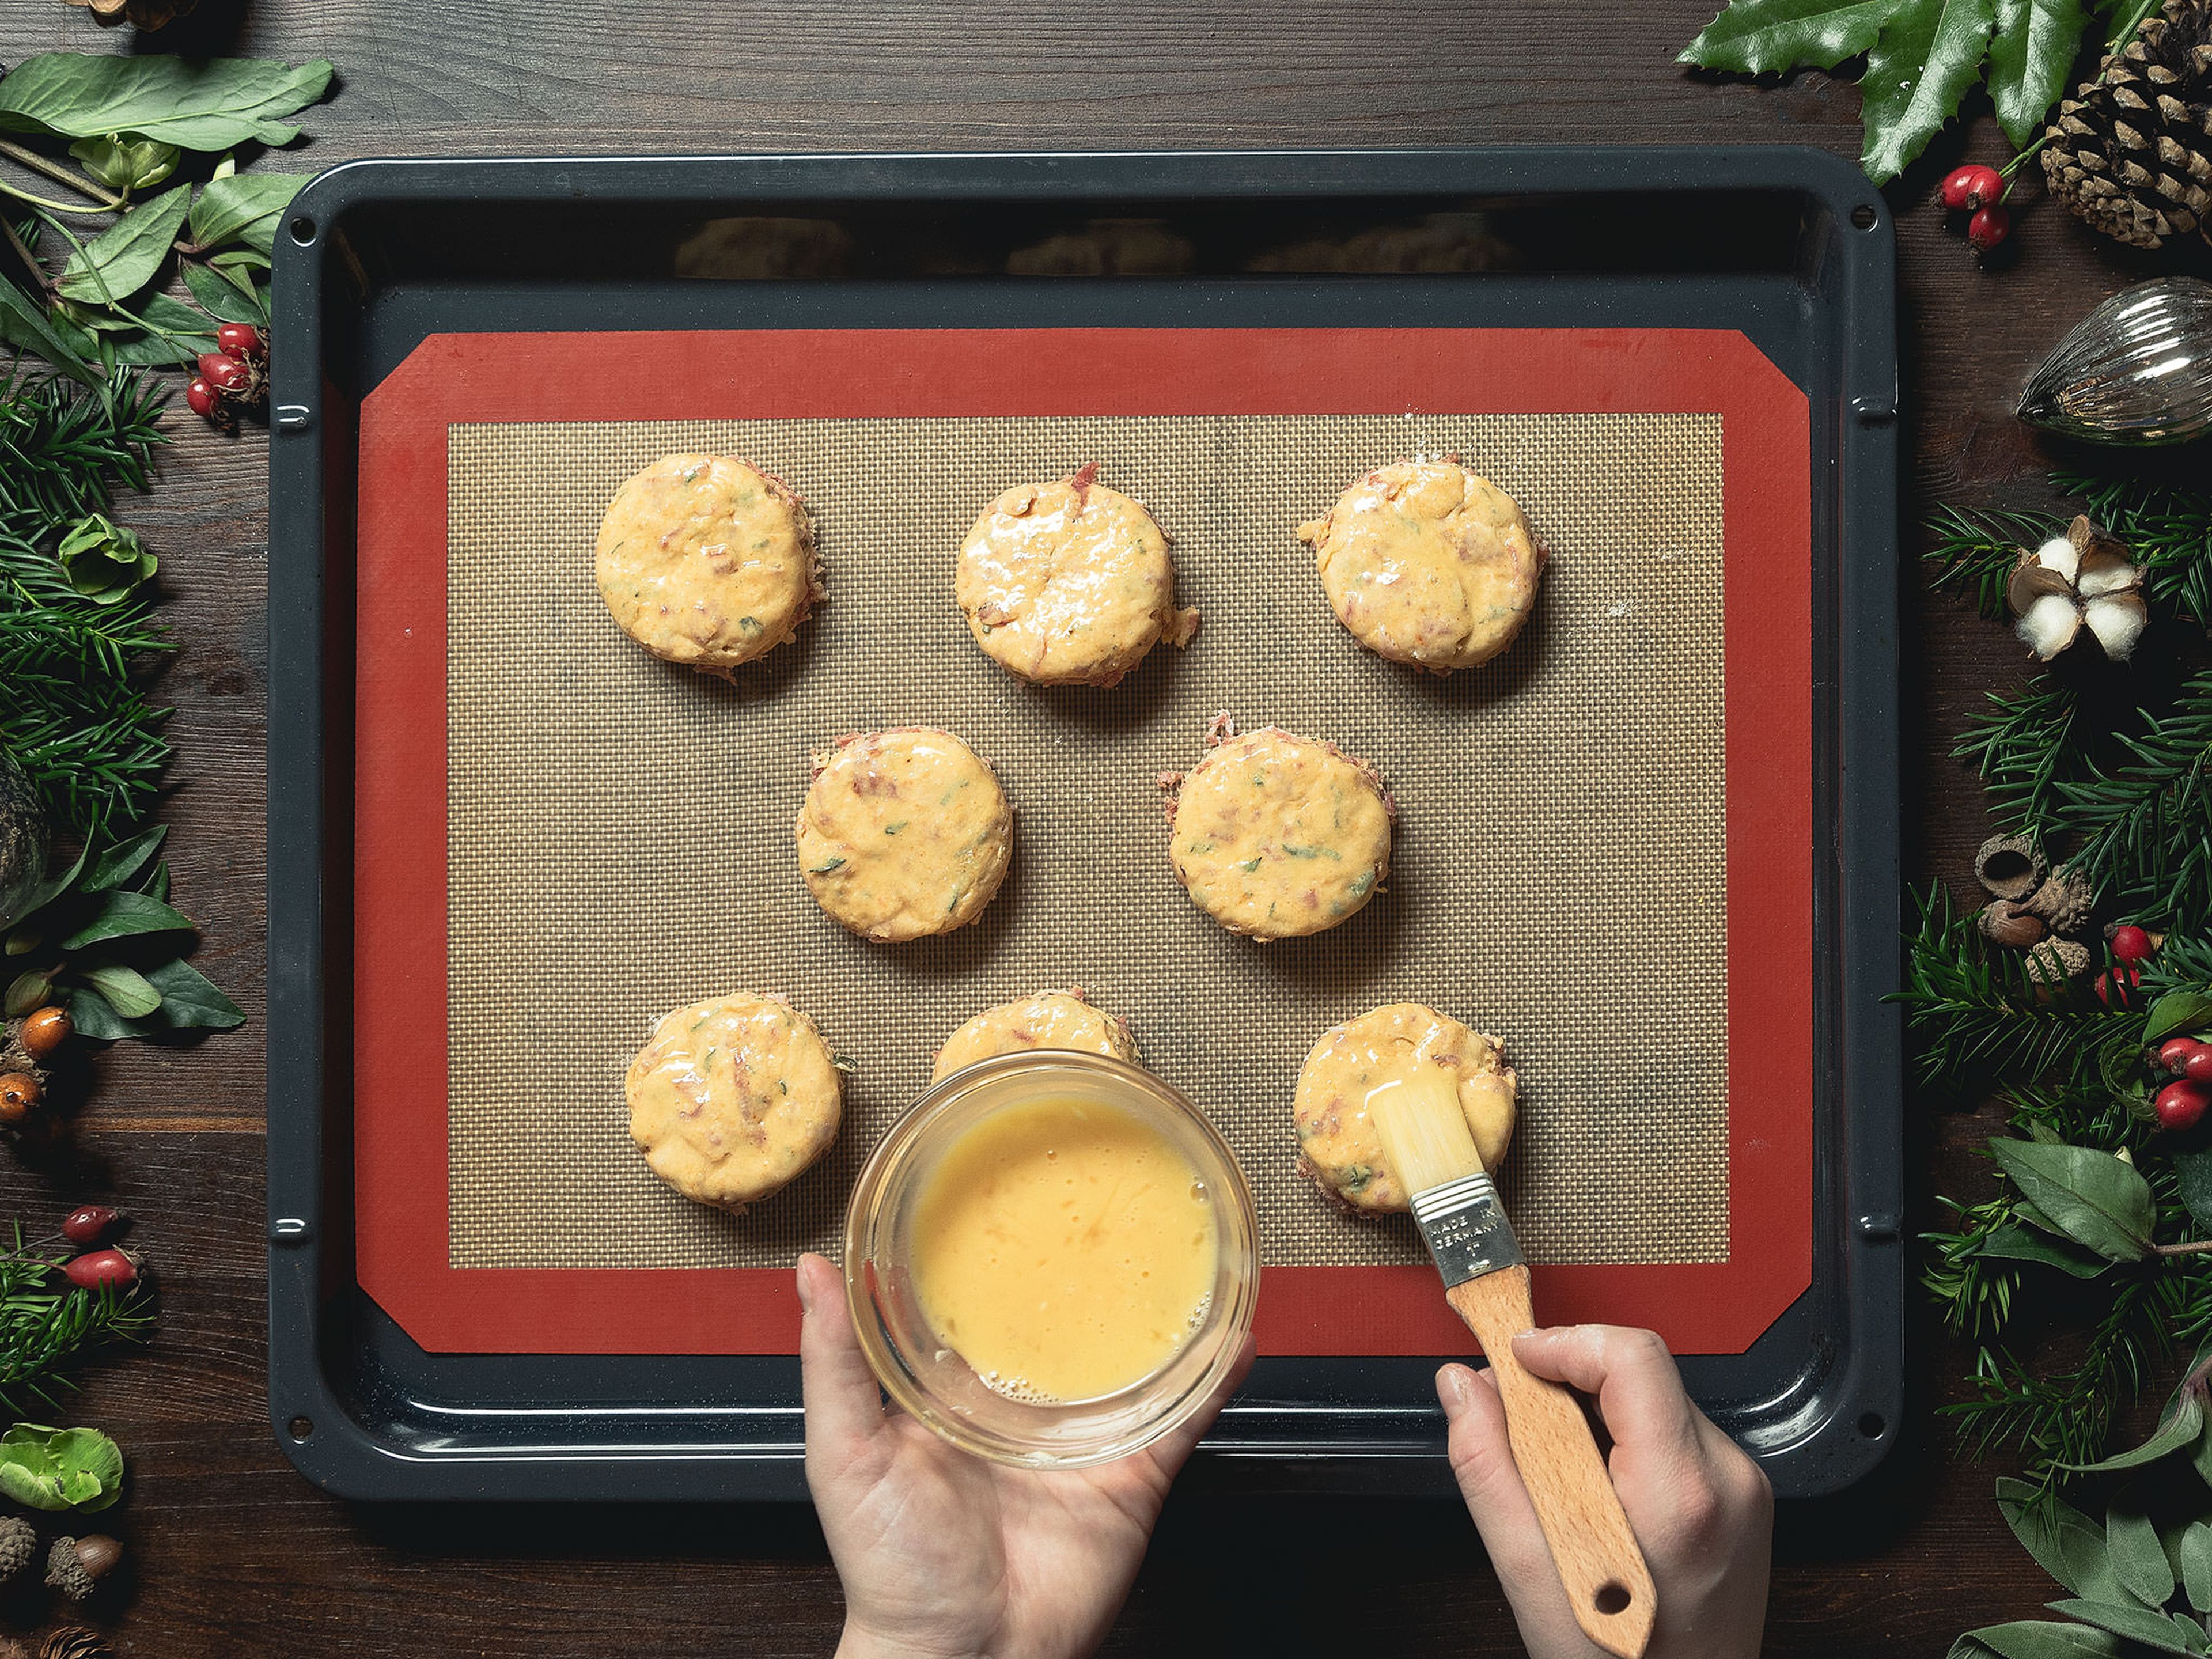 On a floured work surface, roll out the dough approx. 2.5 cm/1-in. thick and cut out circles. Transfer scones to a silicone baking mat-lined baking sheet. Whisk the egg in a small bowl and brush the scones with it. Bake at 200°C/395°C for approx. 15 min. or until golden brown. Serve with butter and enjoy!